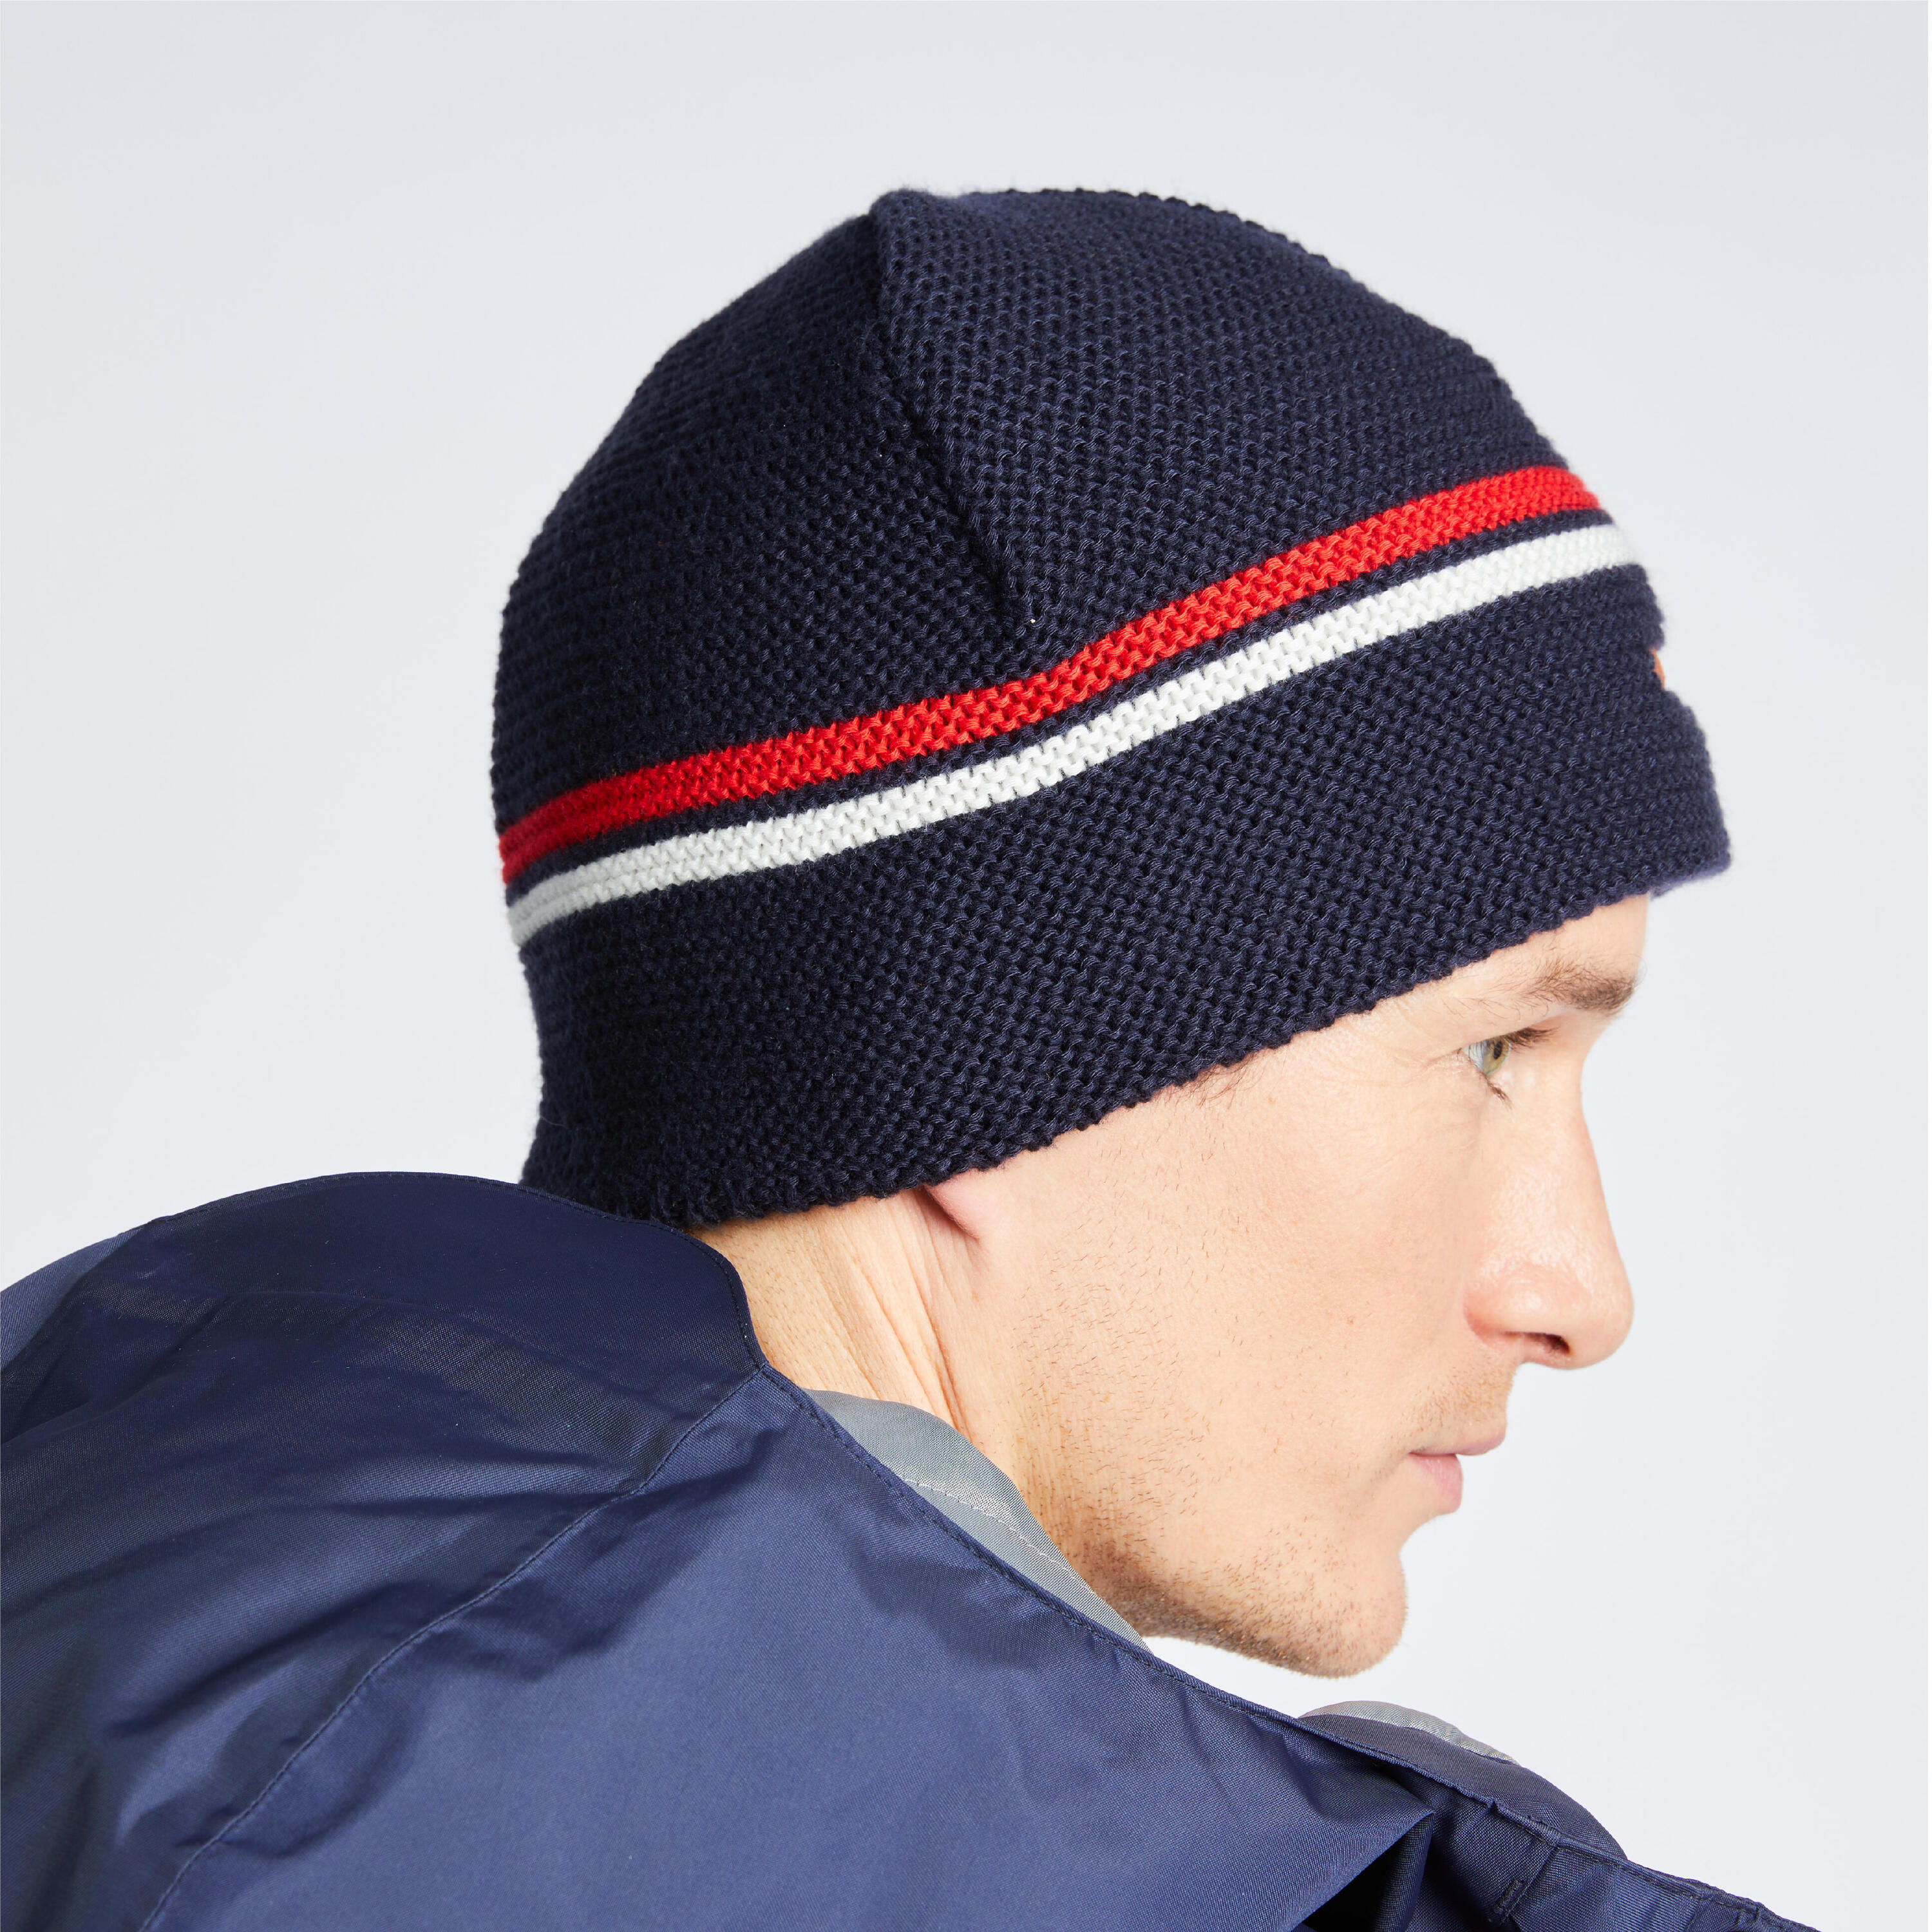 Adult sailing warm windproof beanie SAILING 100 - Blue white red 6/8